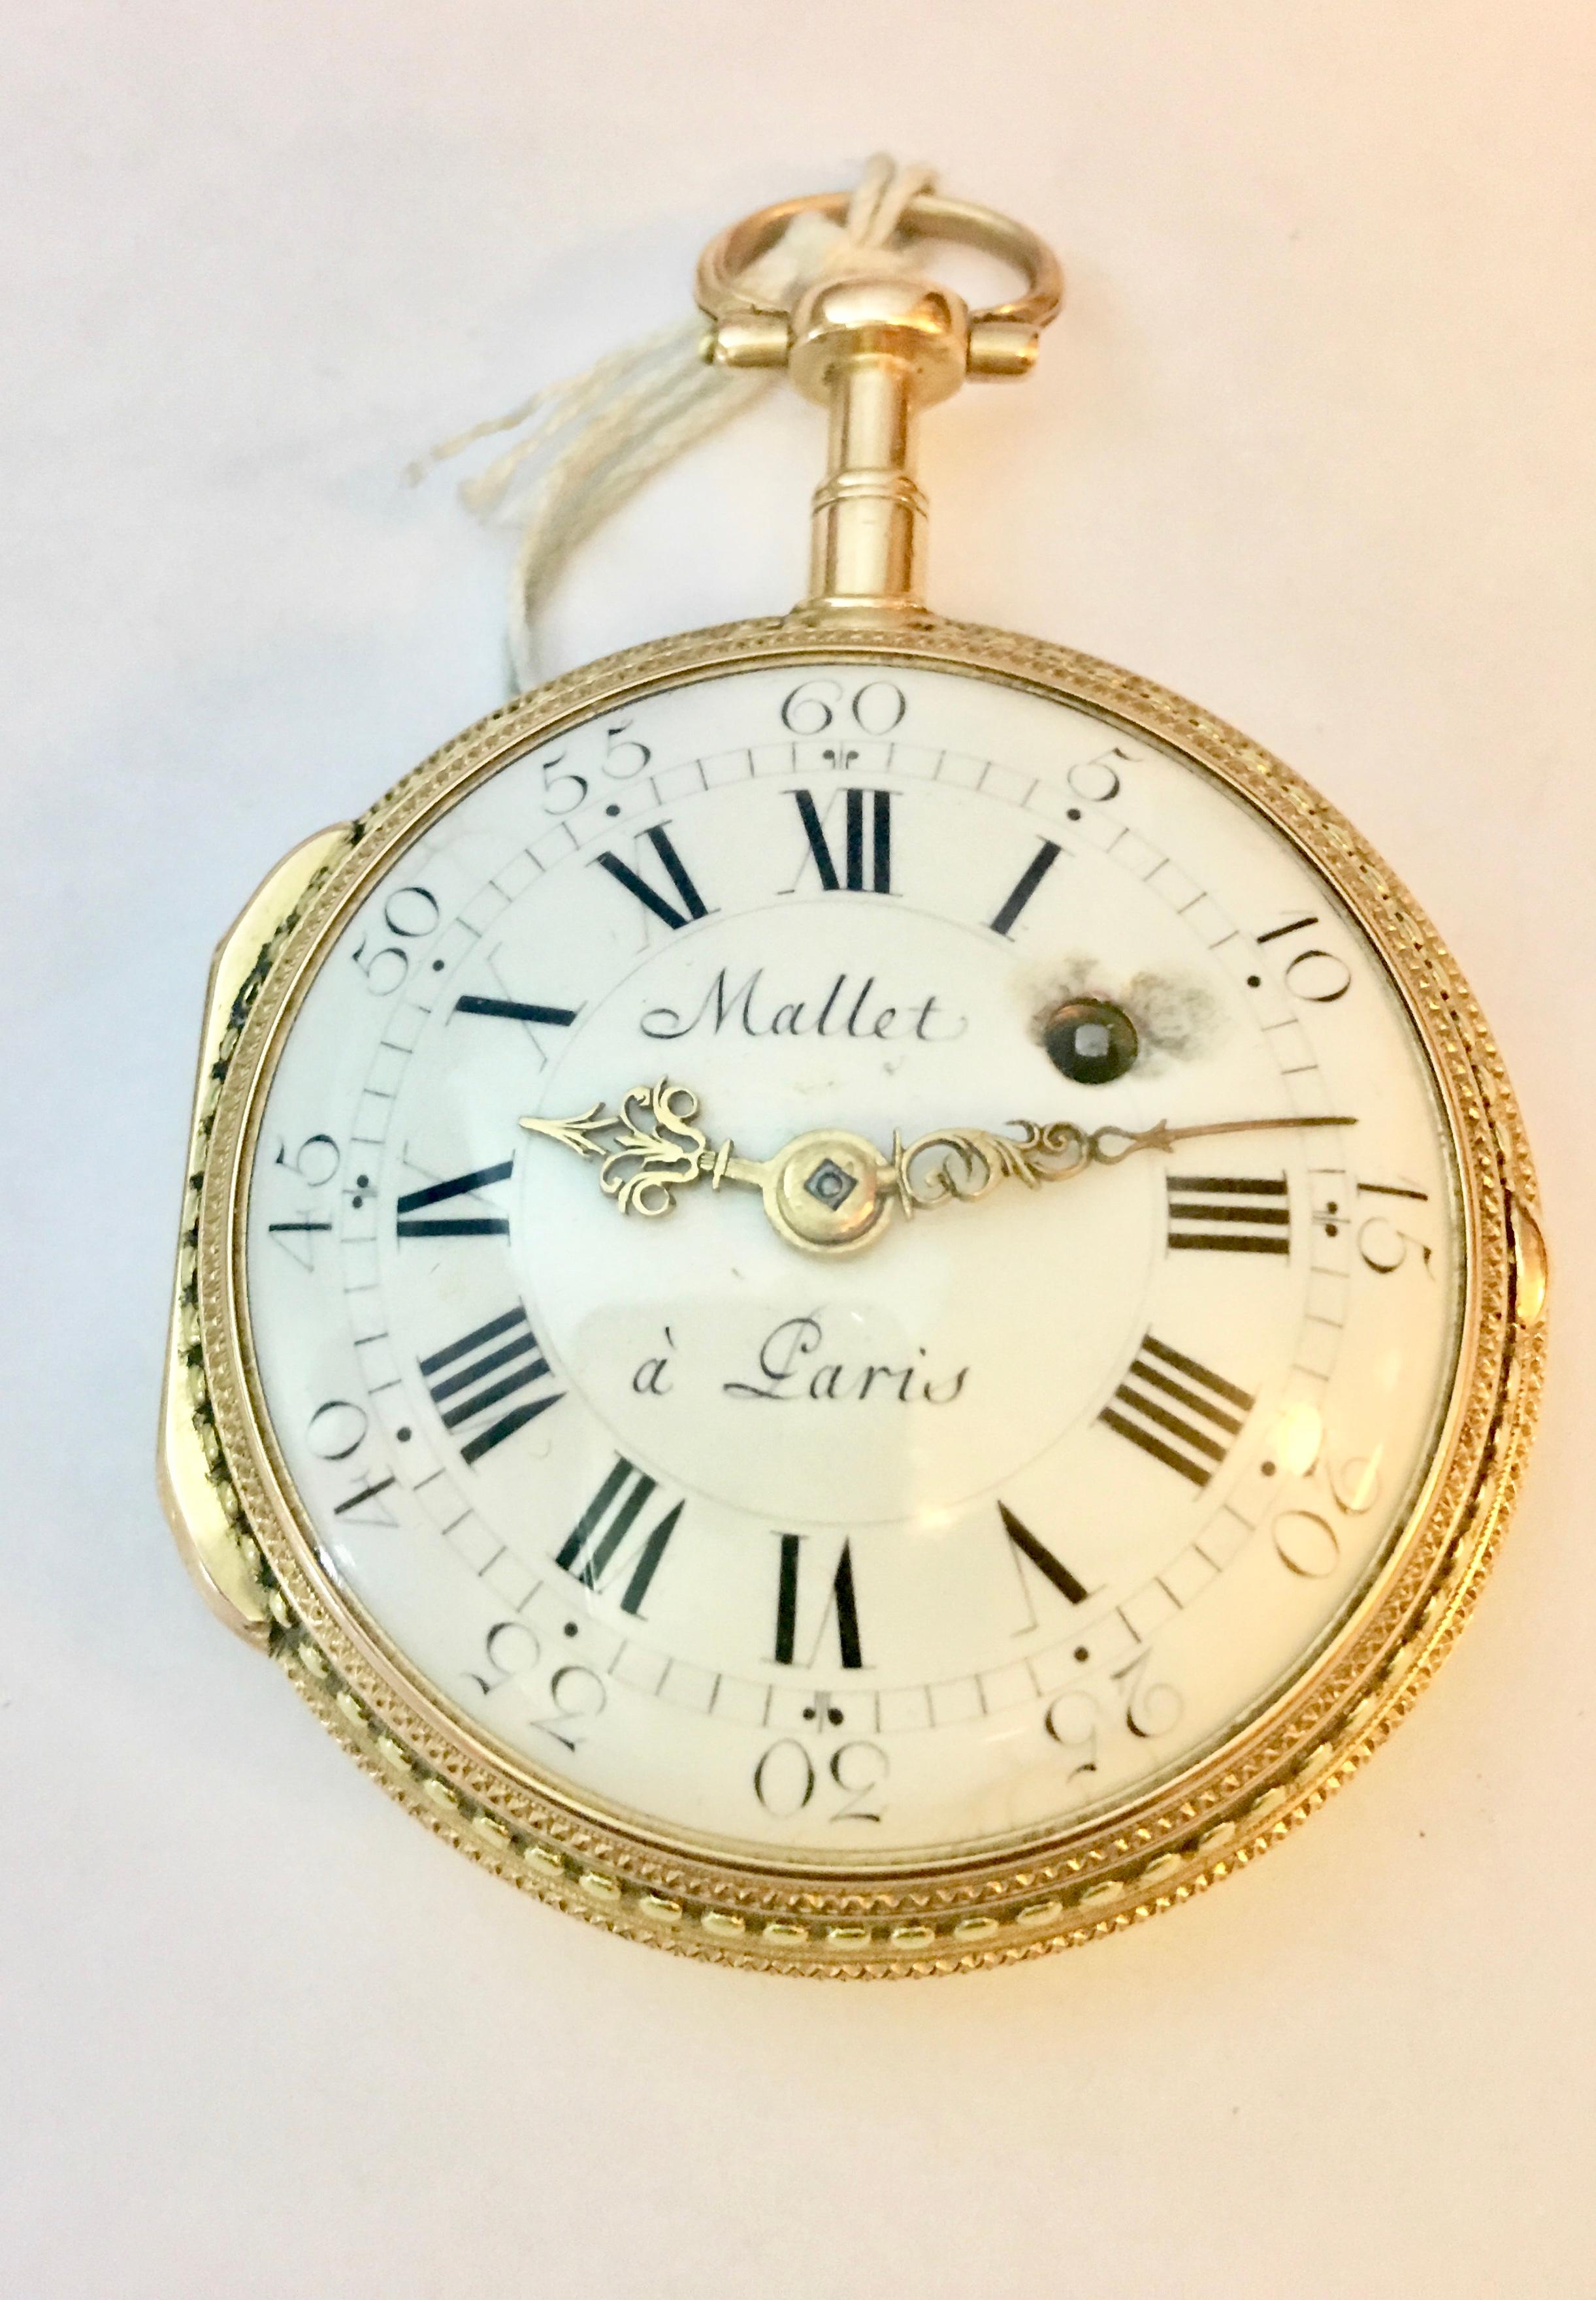 Rare & Early Verge Fusee 18 Karat Tri-Color Gold Pocket Watch by Mallet A Paris In Good Condition For Sale In Carlisle, GB